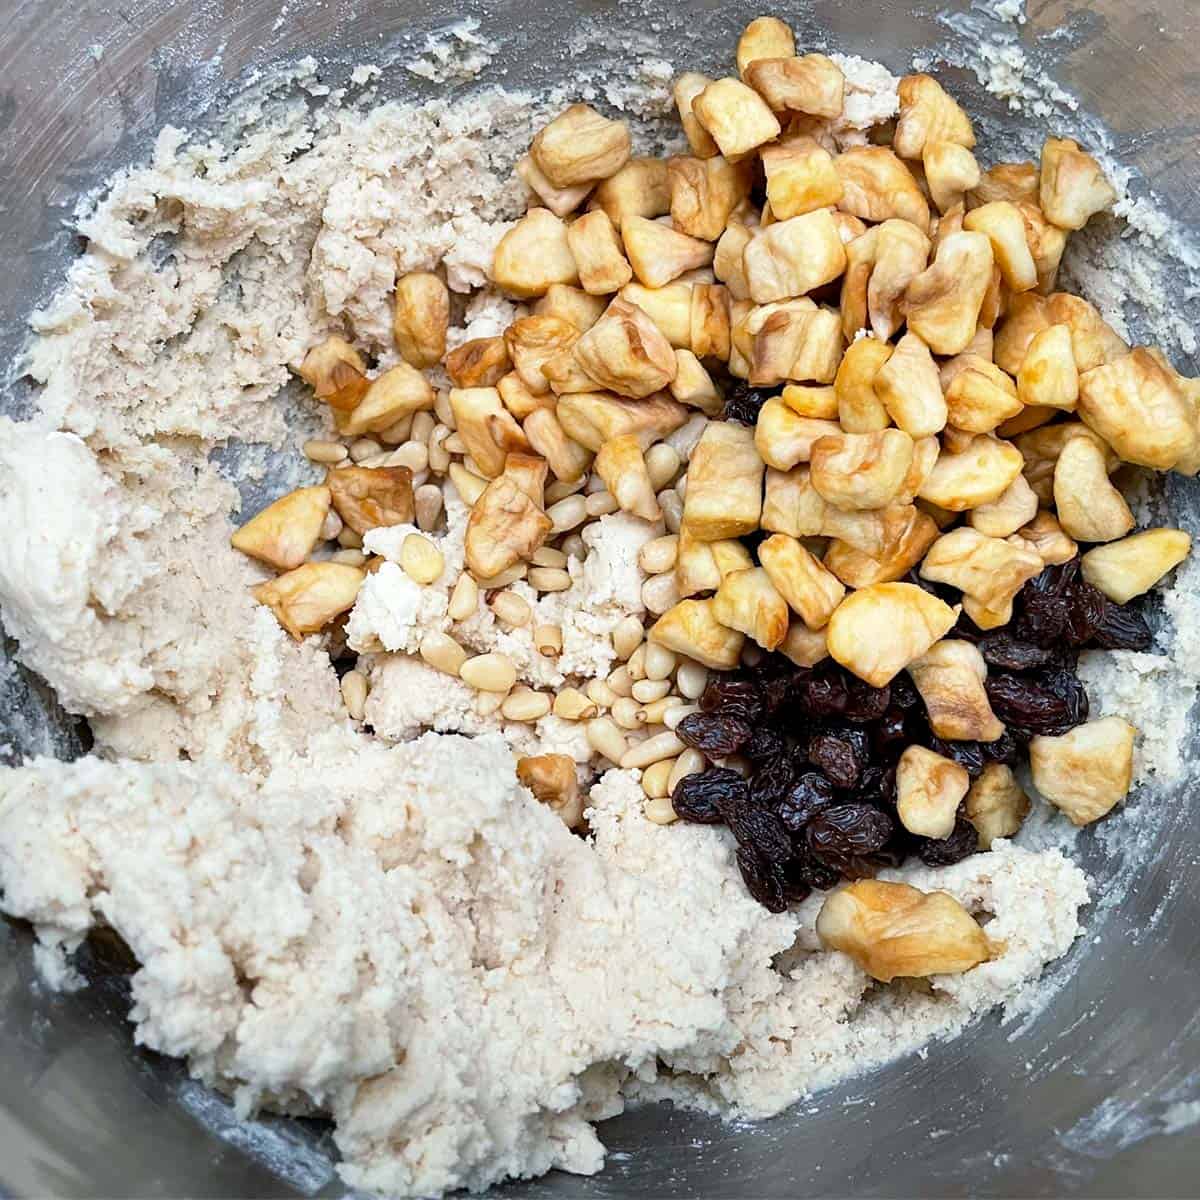 Adding raisins, pine nuts, and infused apples into a bowl of the cookie dough.